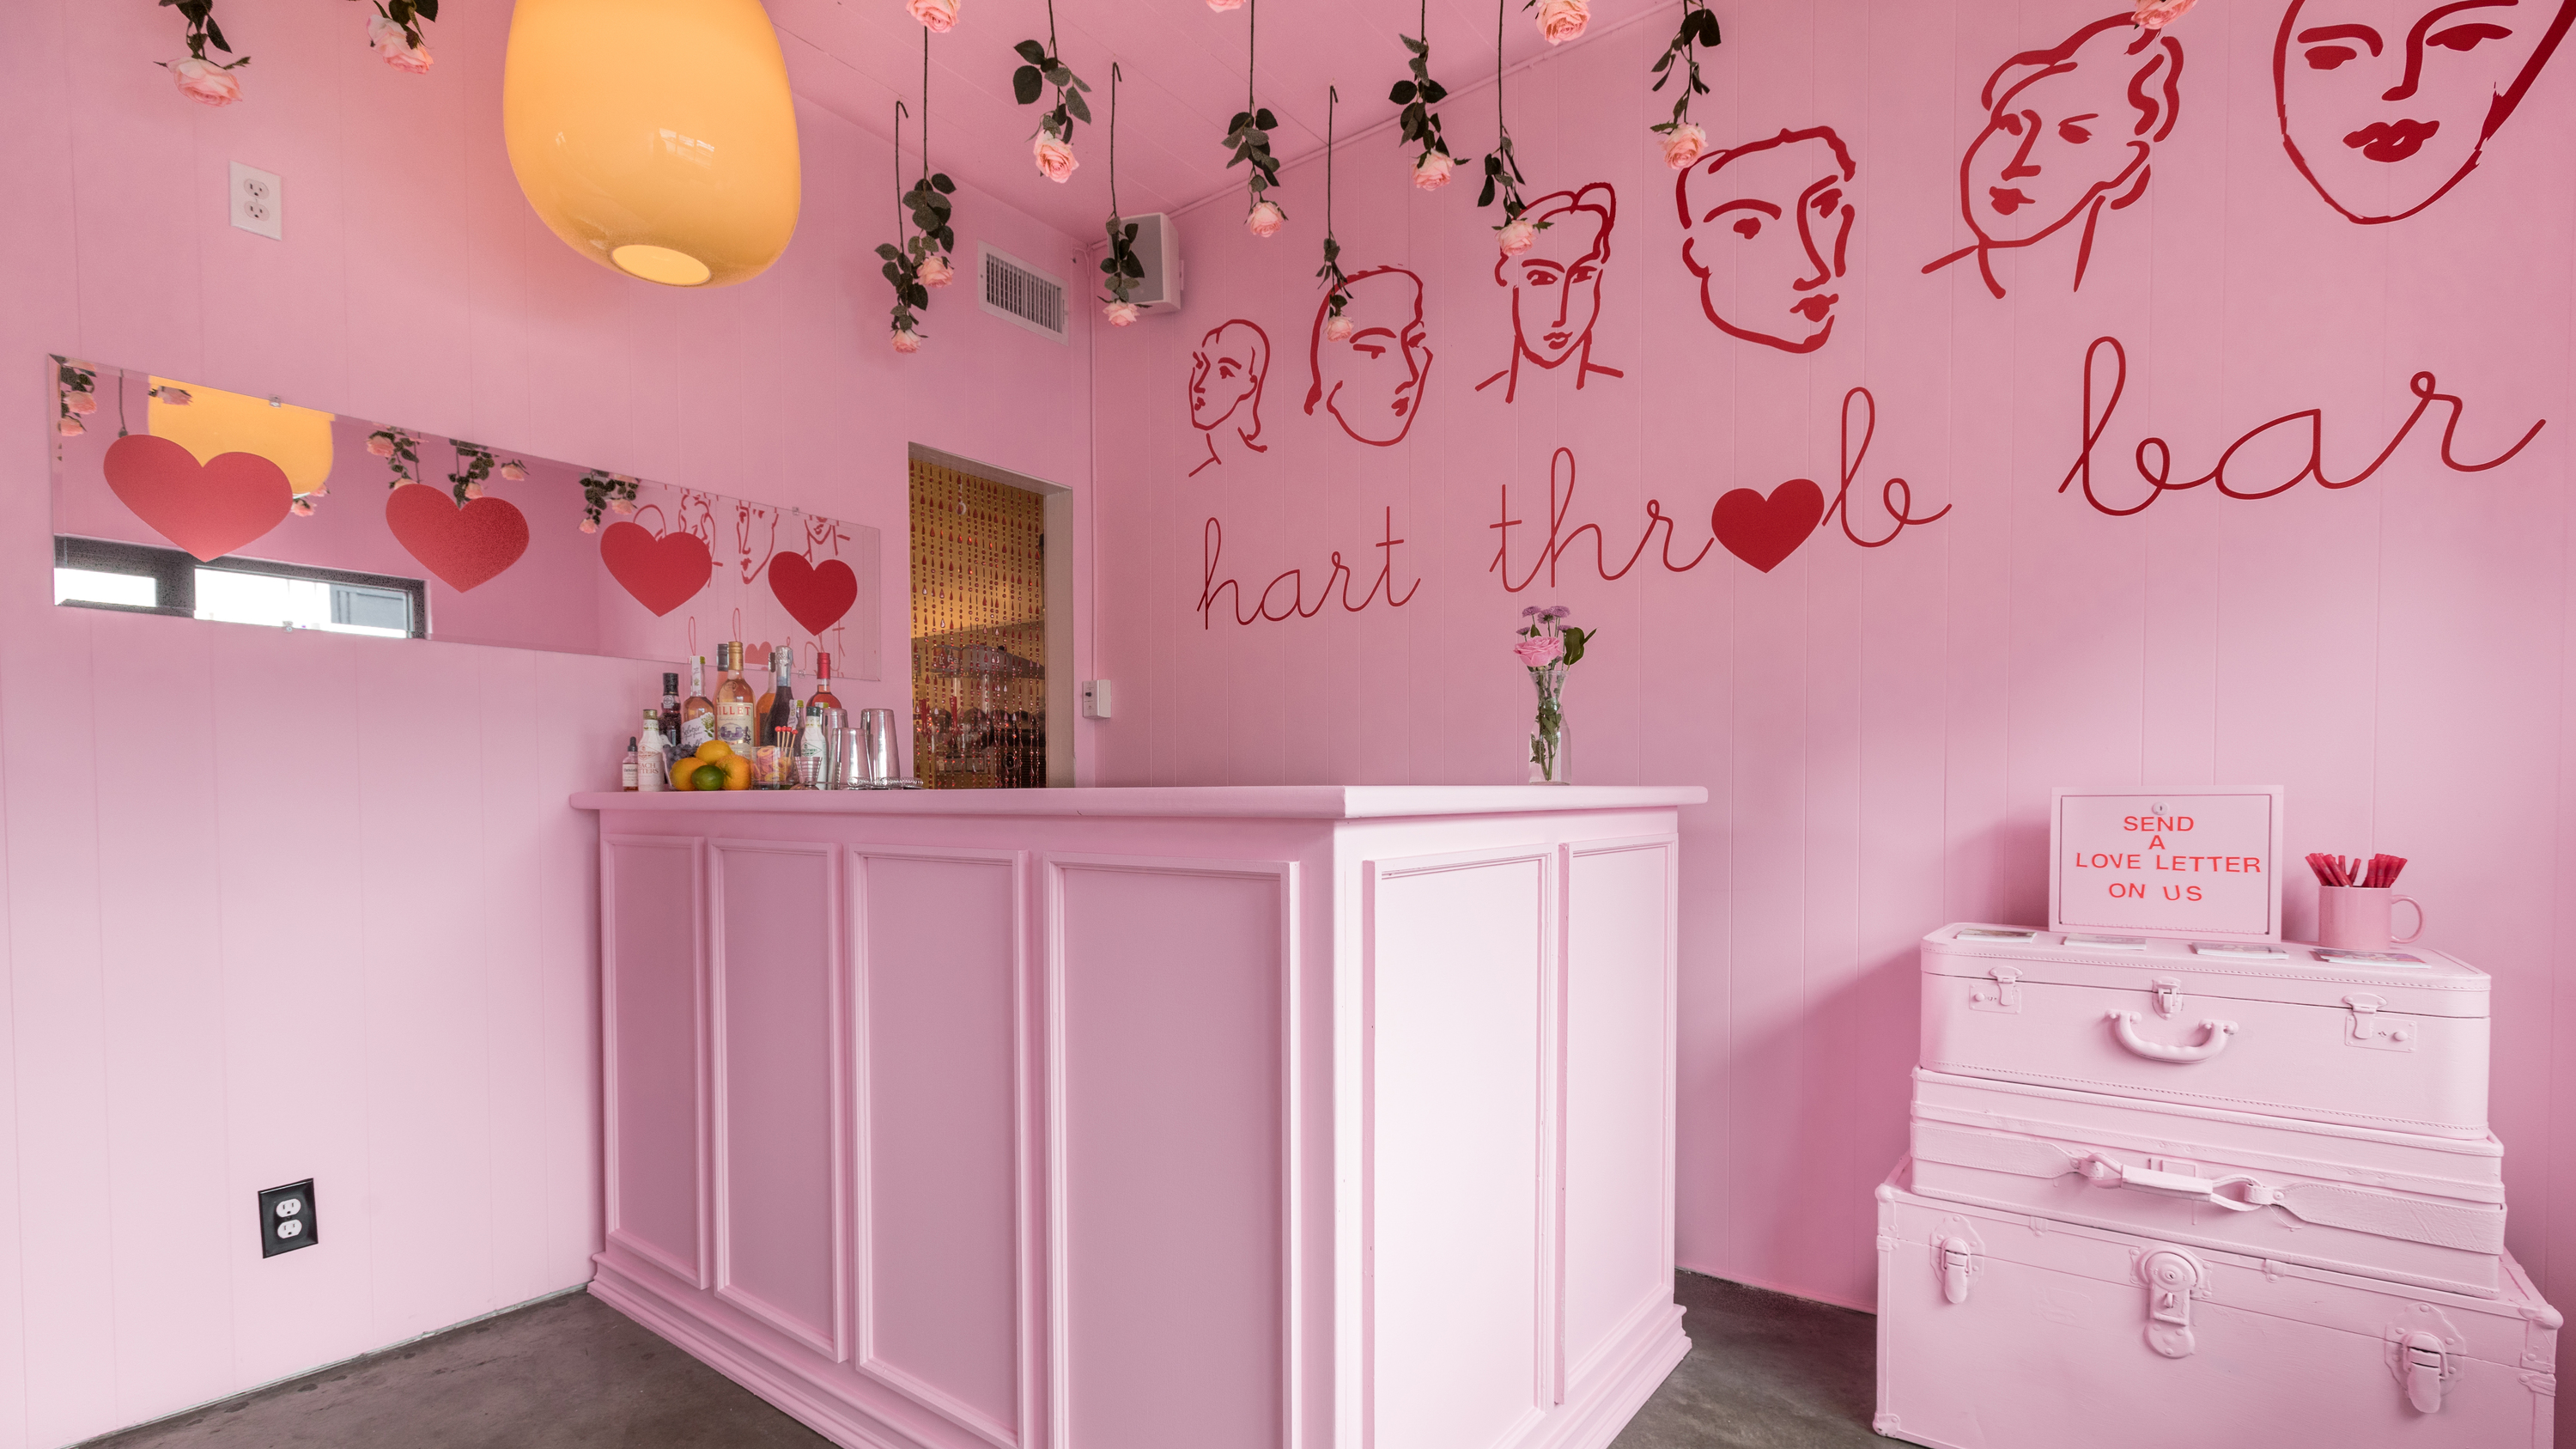 There's now an adorable, love-themed pop-up bar in the Palihotel Melrose